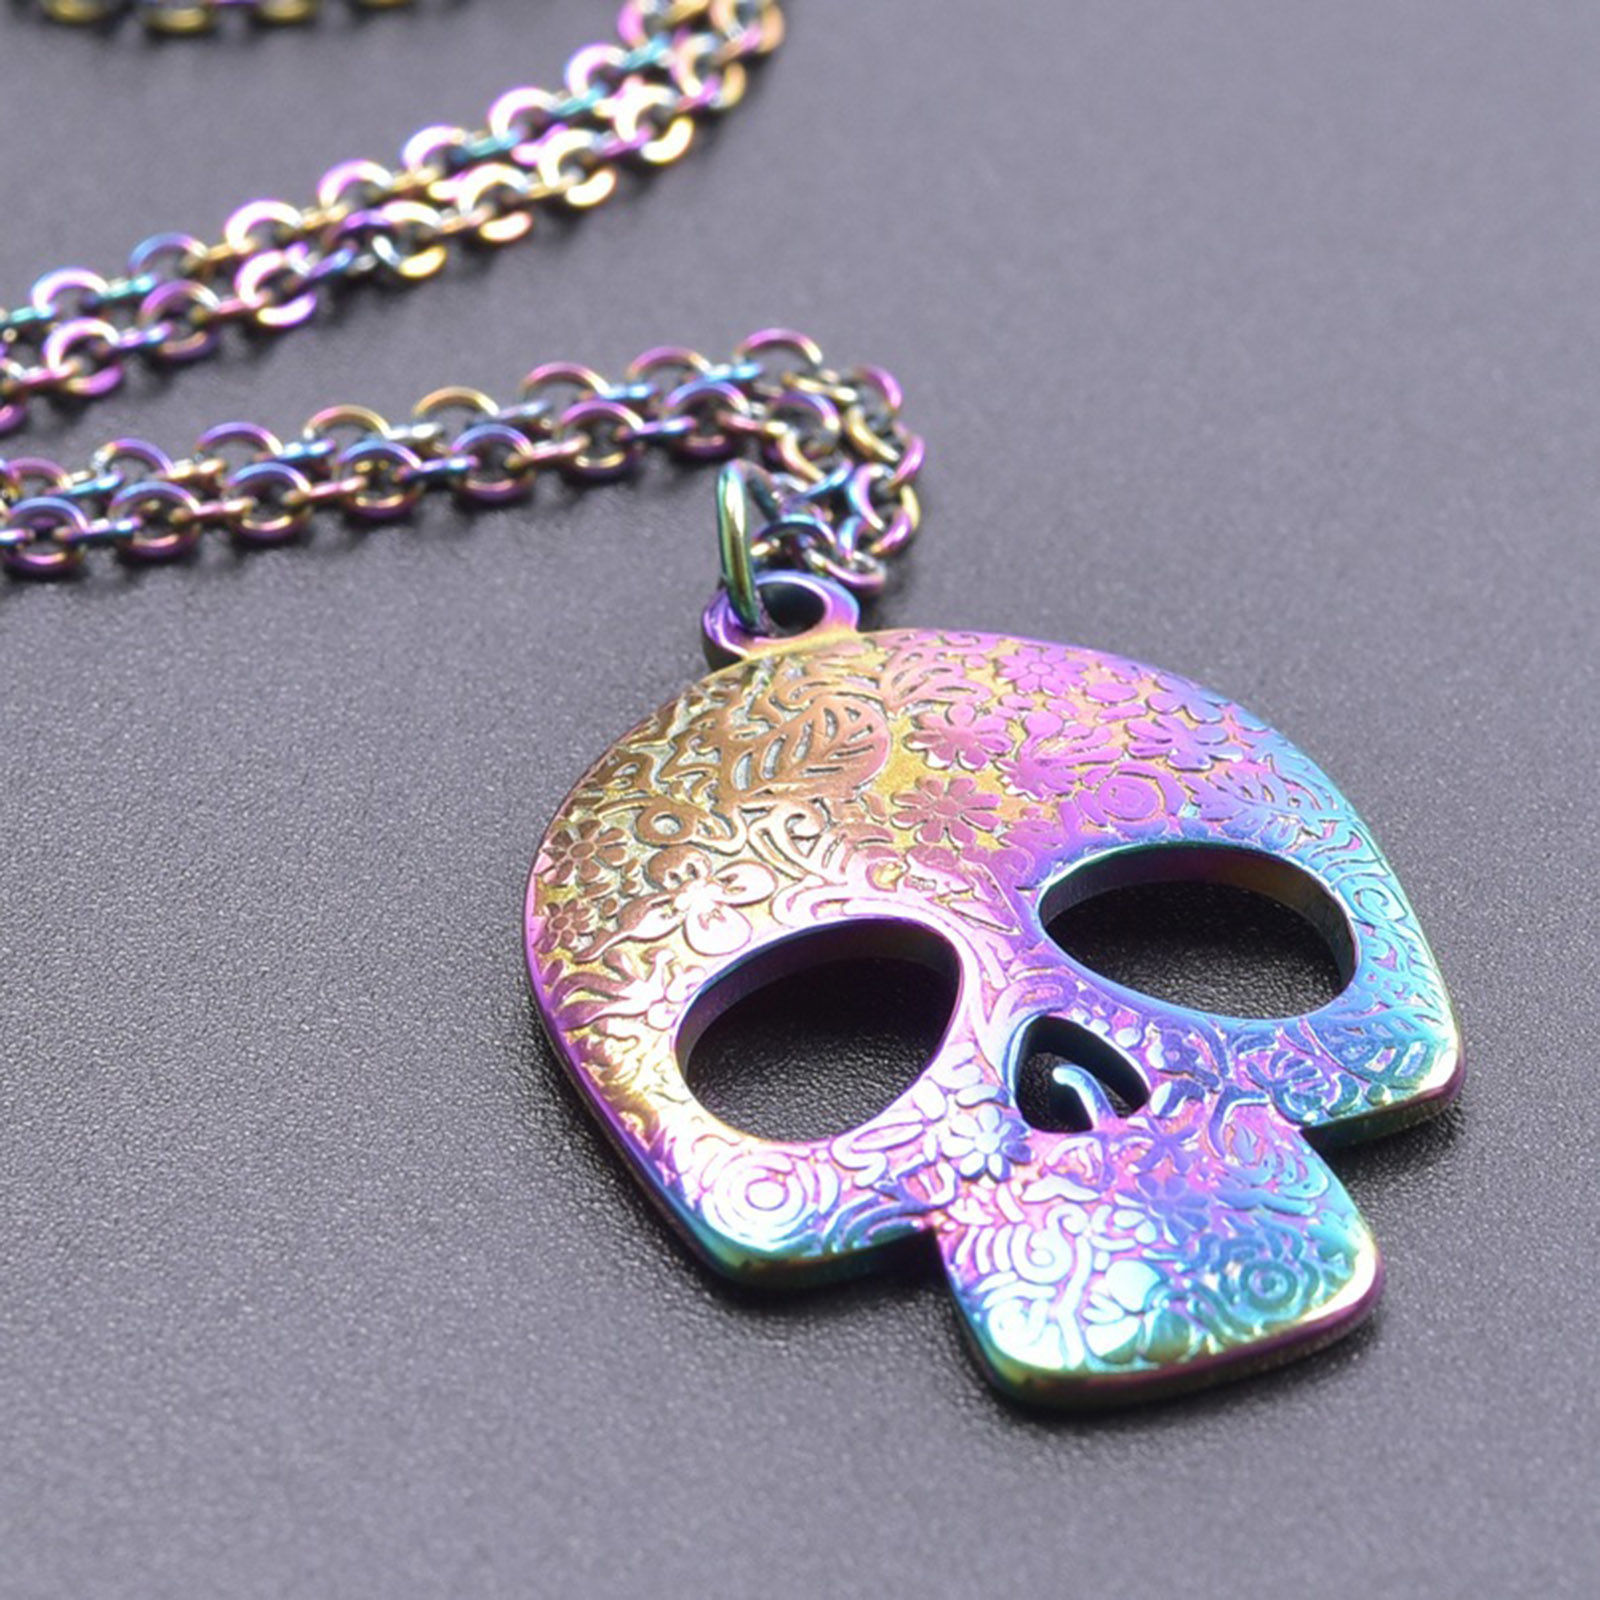 Picture of Stainless Steel Halloween Link Cable Chain Necklace Multicolor Skull Carved Pattern Hollow 50cm(19 5/8") long, 1 Piece